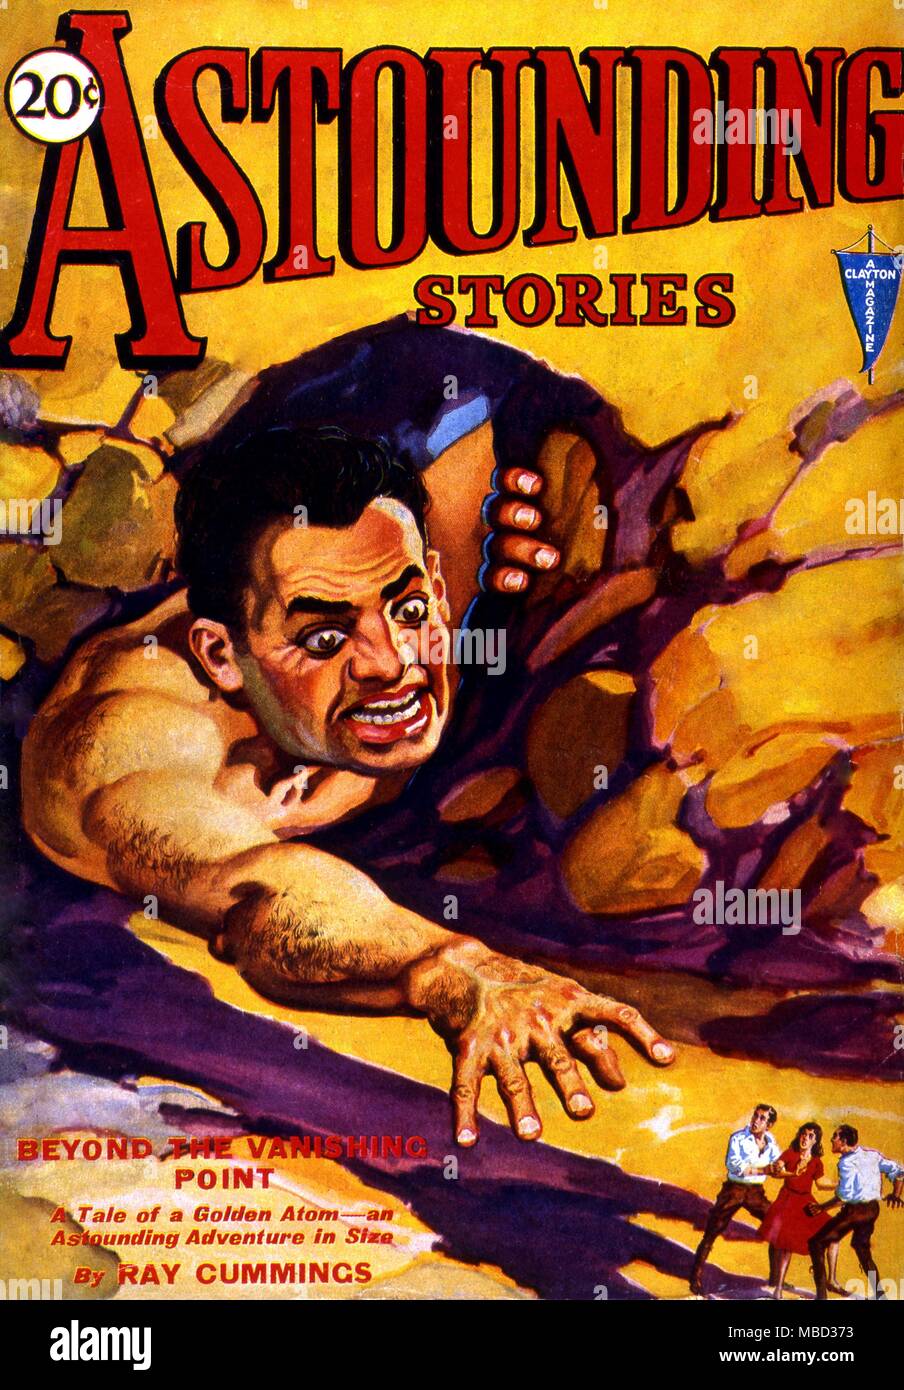 Science Fiction and Horror Magazines Cover of Astounding Stories. March 1931. Artwork by Wesso. Stock Photo